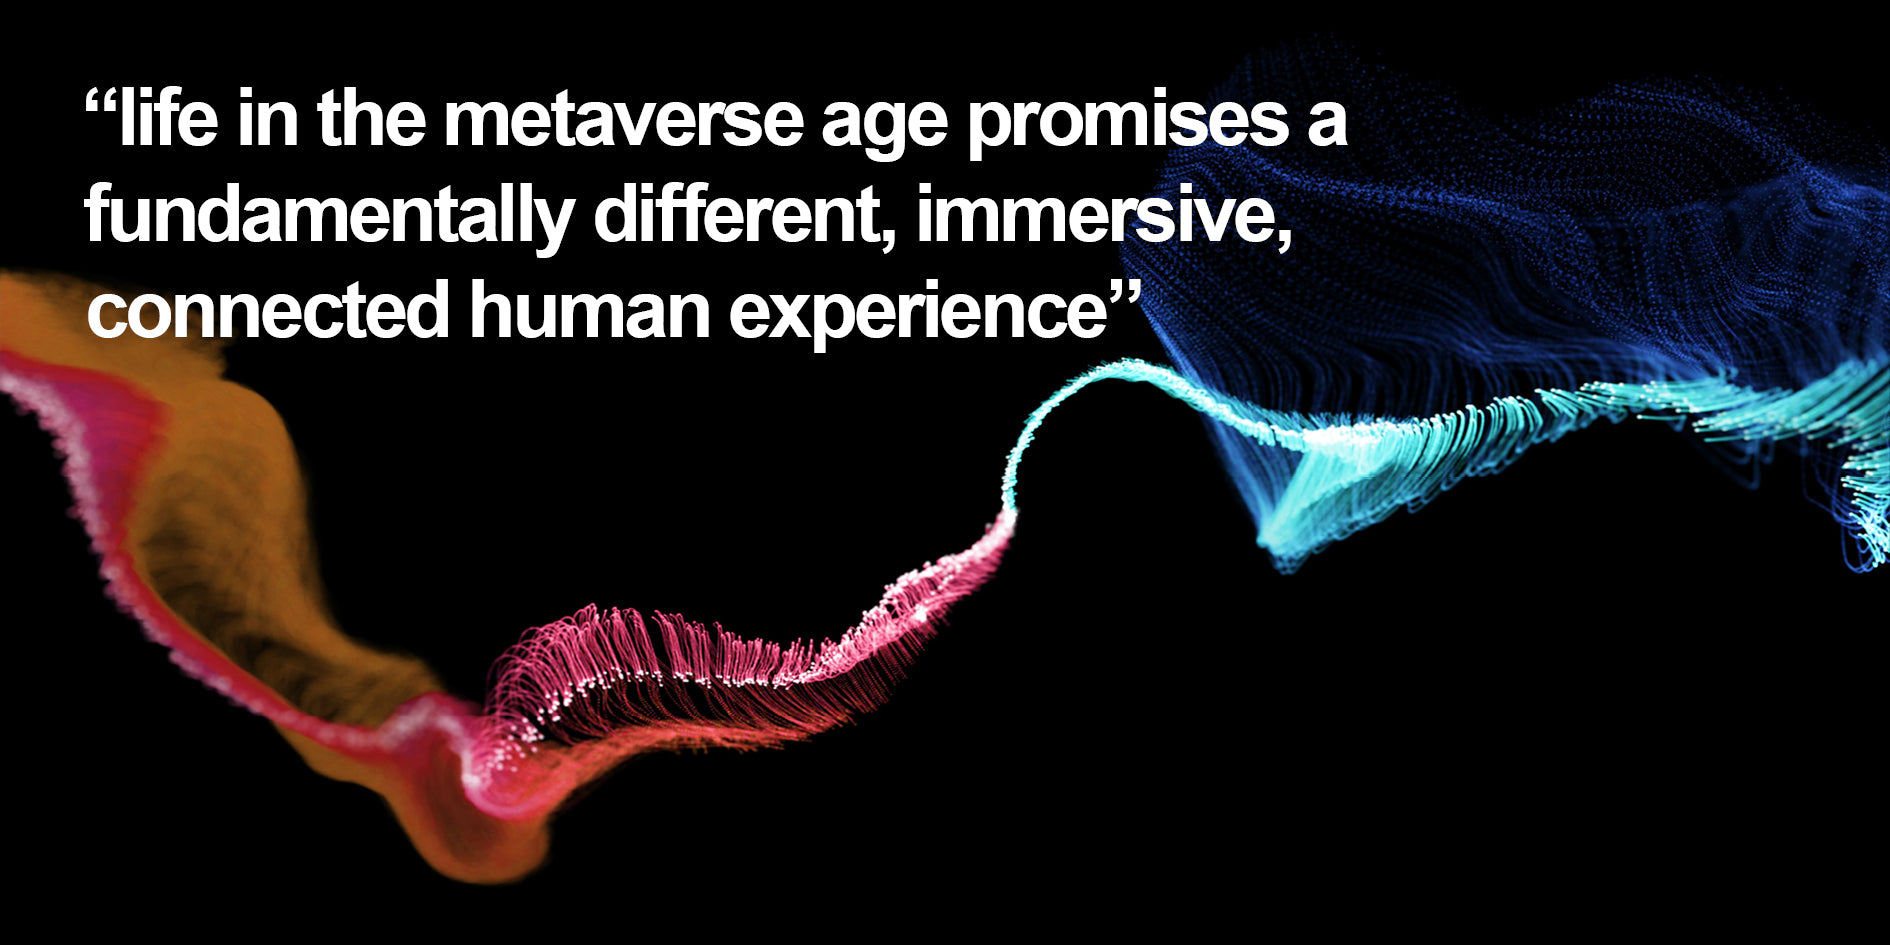 Life in the metaverse age promises to be a fundamentally different, immersive, connected experience